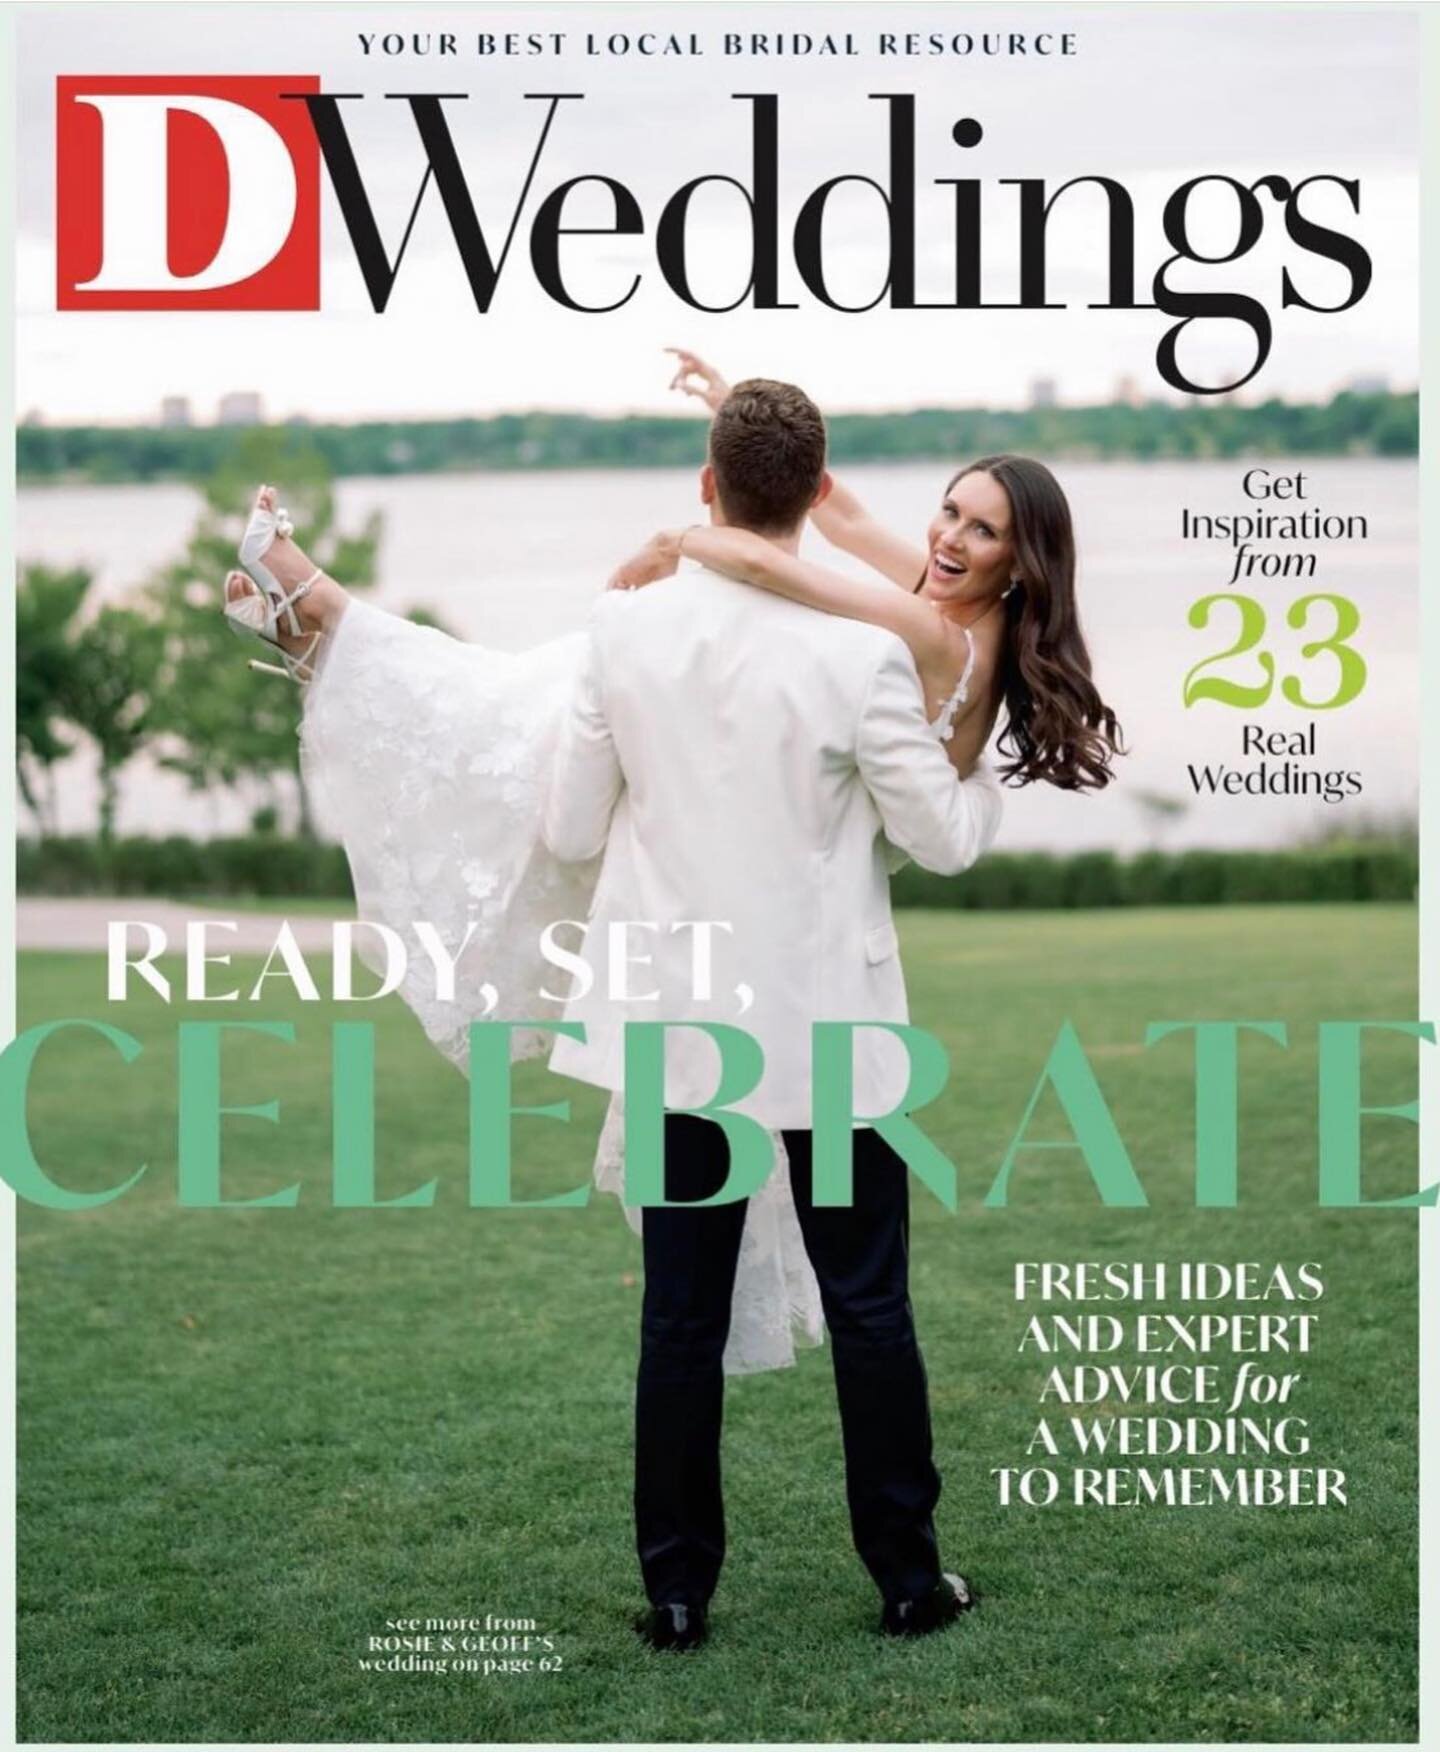 We made the cover of @dweddings with our STUNNING bride @rosie_dunham 🫶🏼 So honored to have another cover with @dweddings 🤍 we got to work with the BEST TEAM on this wedding and our hearts are so full! 

Planning &amp; Design: @Engagedeventsdallas